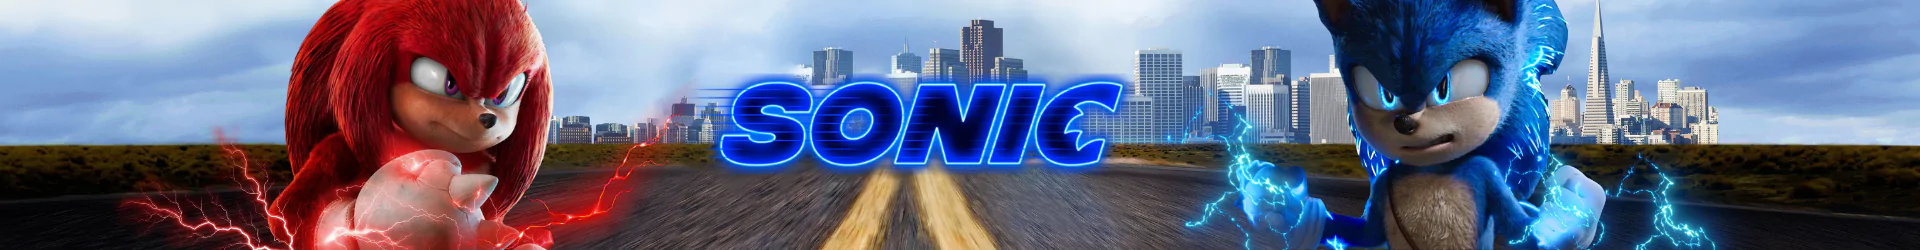 Sonic posters banner